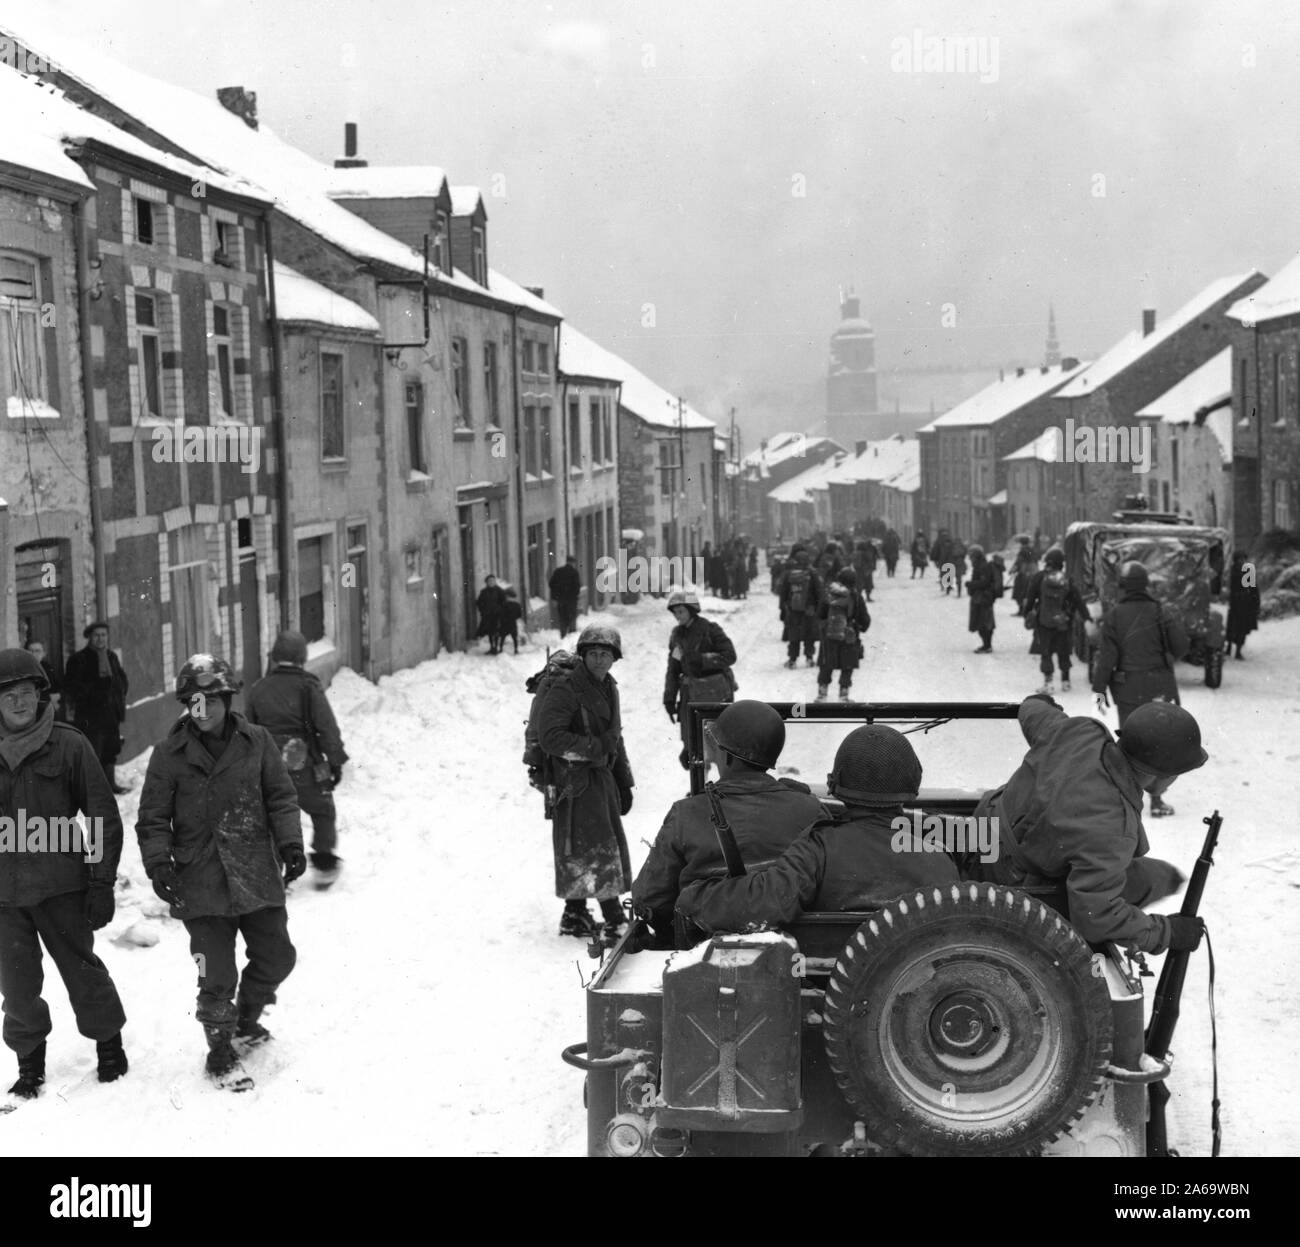 Original caption: St. Hubert, Belgium-American infantryman of the 87th Div. enter the town of St. Hubert right after the Germans fled the town. 1945. Stock Photo